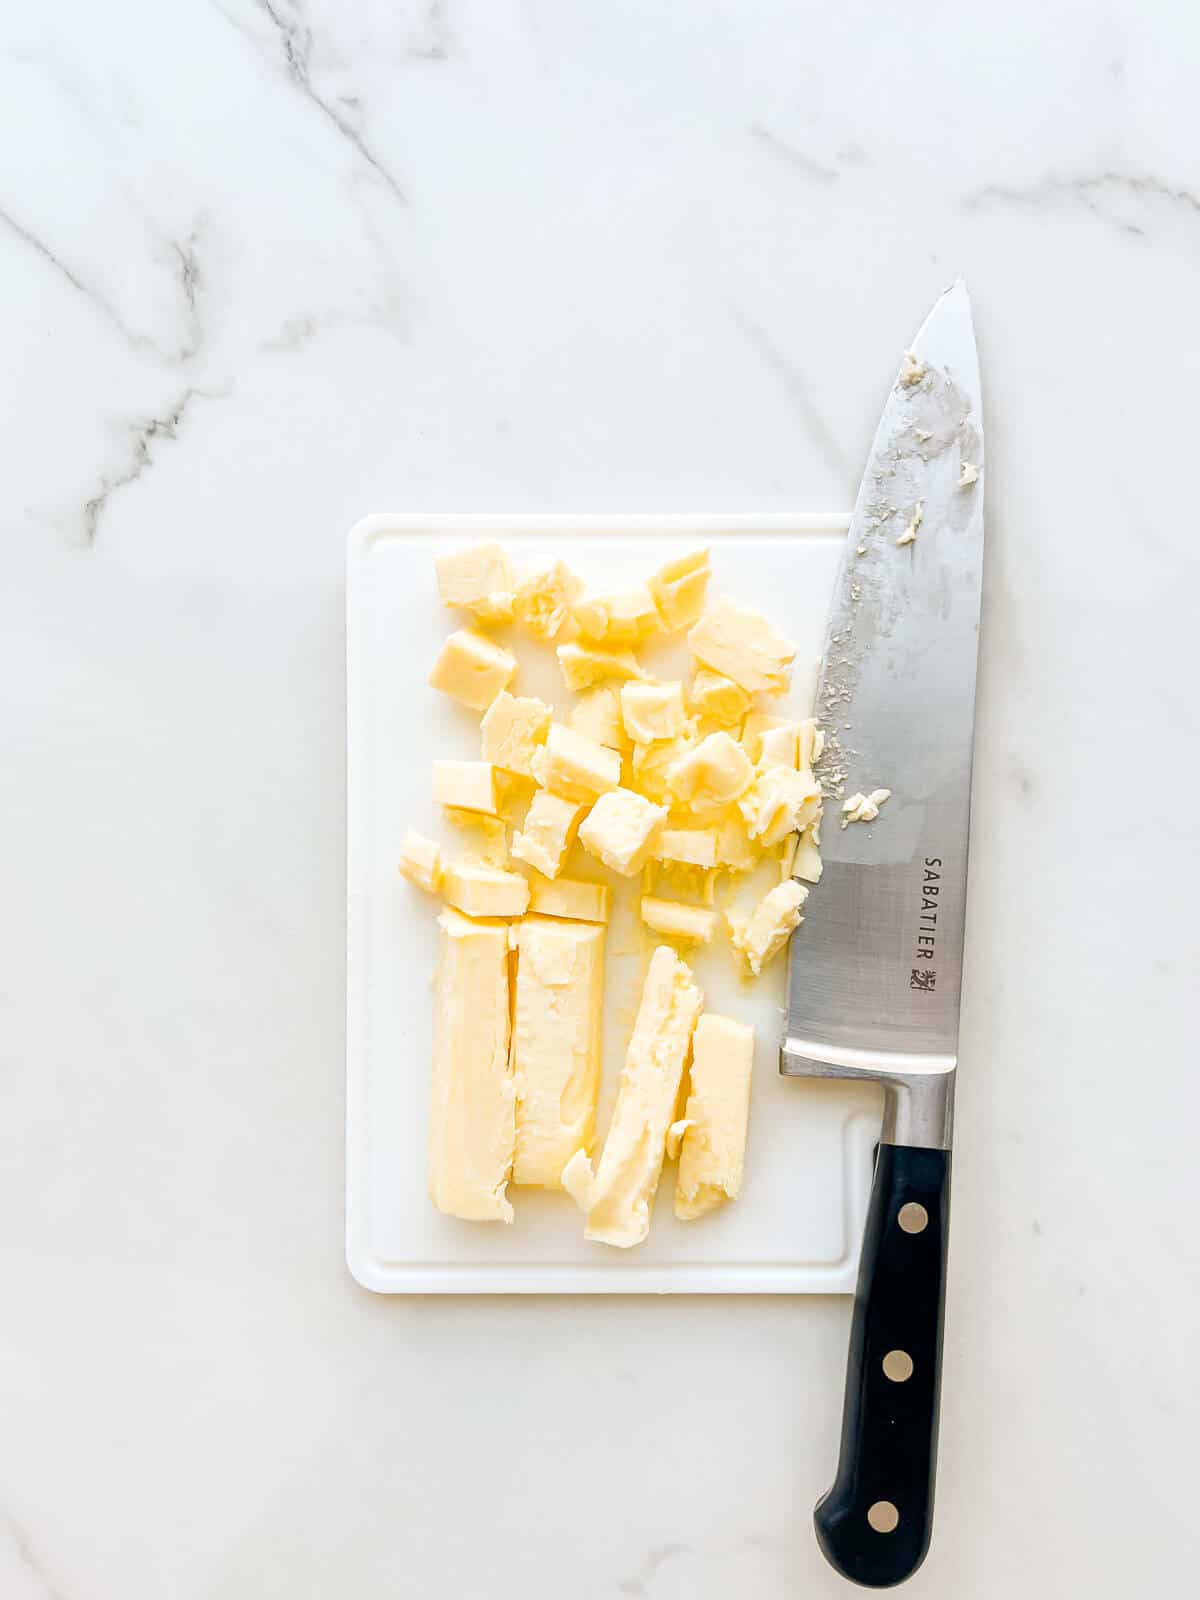 Chopping cold butter into pieces to soften it faster for baking.